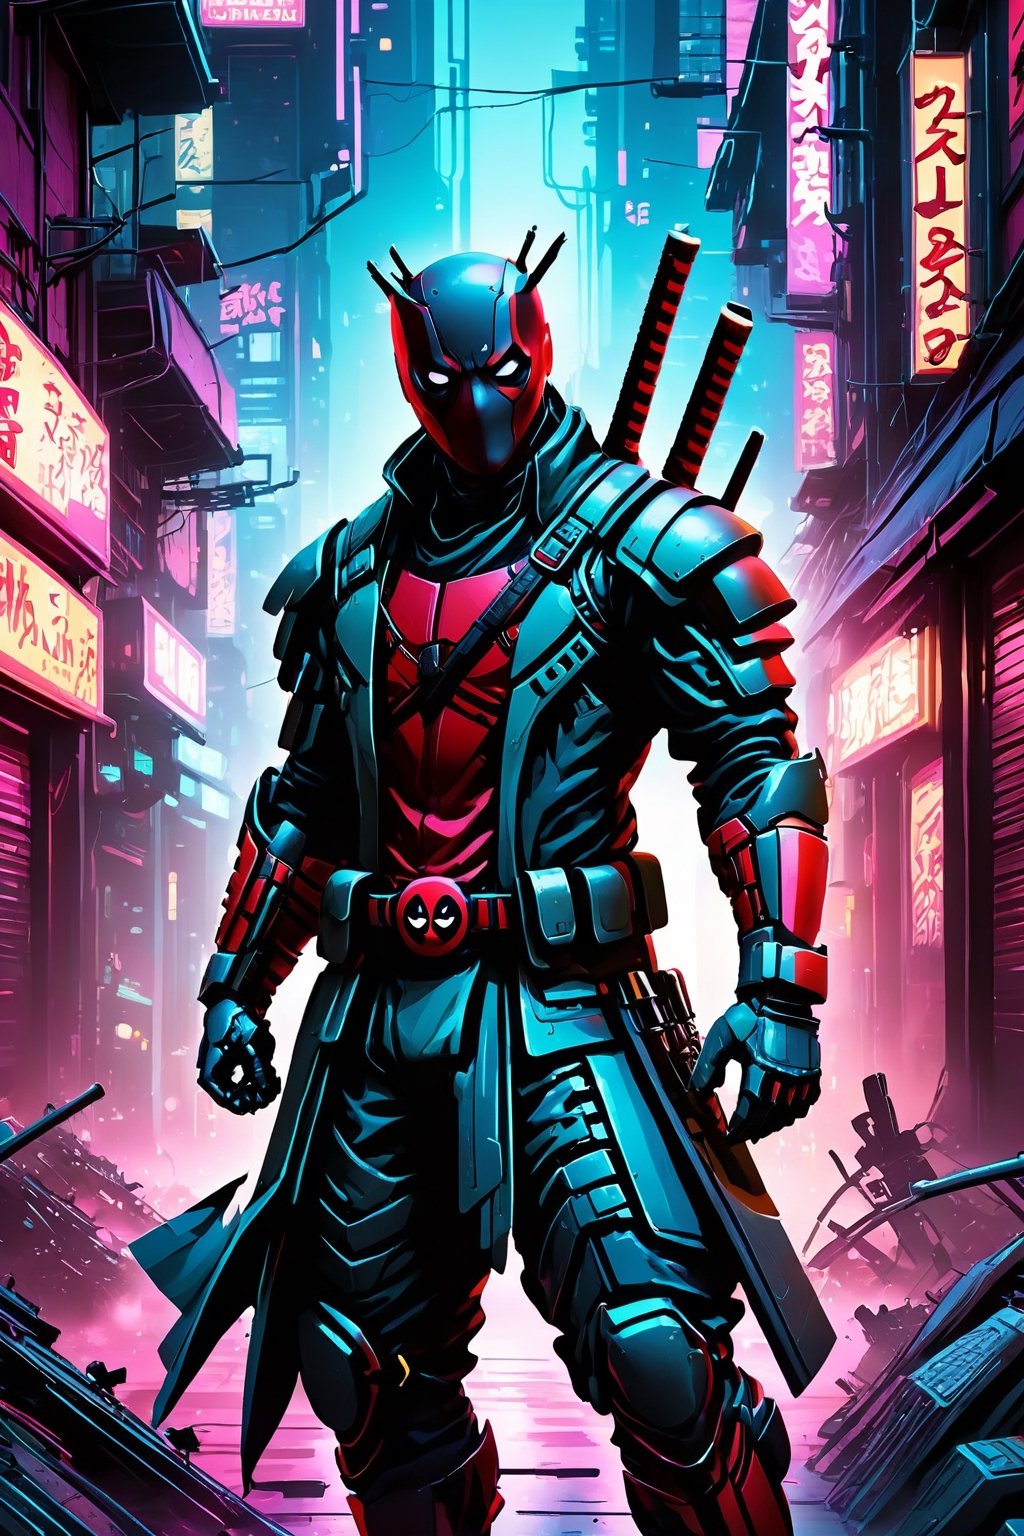 Deadpool, from the Marvel comics, can be imagined in a dystopian urban setting, where a cybernetically enhanced street is adorned with high-tech armor. He strides through neon-lit alleys, casting a cascade of shadows and vibrant light on his gleaming blades and cybernetic implants. This creates a silhouette that defines a modern warrior. The contrast between traditional samurai aesthetics and futuristic cyberpunk elements creates a visual narrative that captures the resilience and adaptability of a modern superhero amidst the chaos of a metropolis. The prompt invites us to create a hyper-realistic image of a street samurai, navigating the gritty streets and symbolizing the coexistence of tradition and technology.